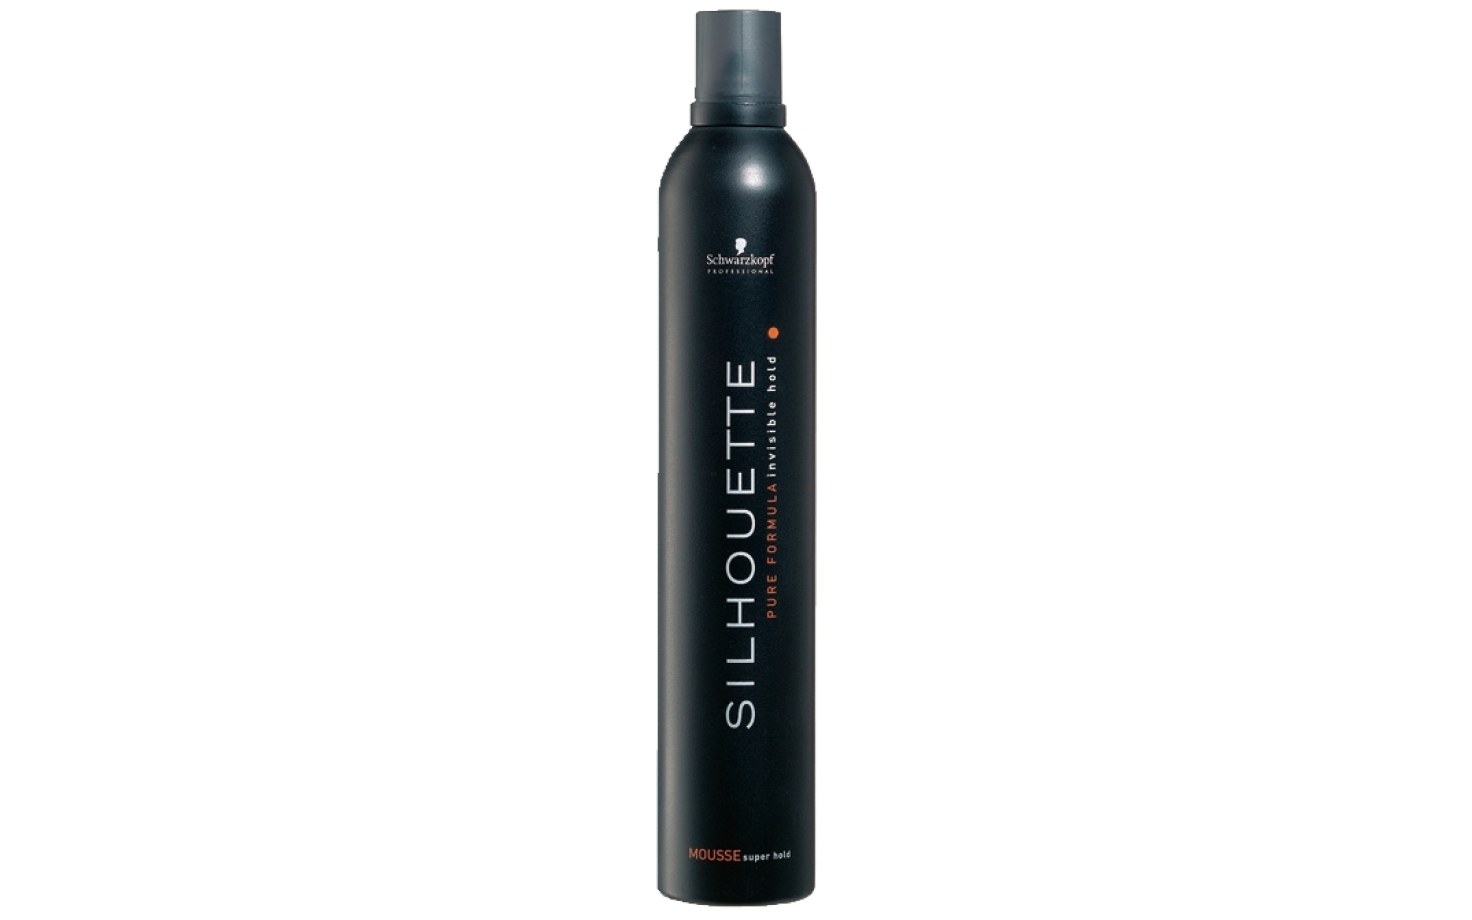 Schwarzkopf Silhouette Super Hold Mousse 